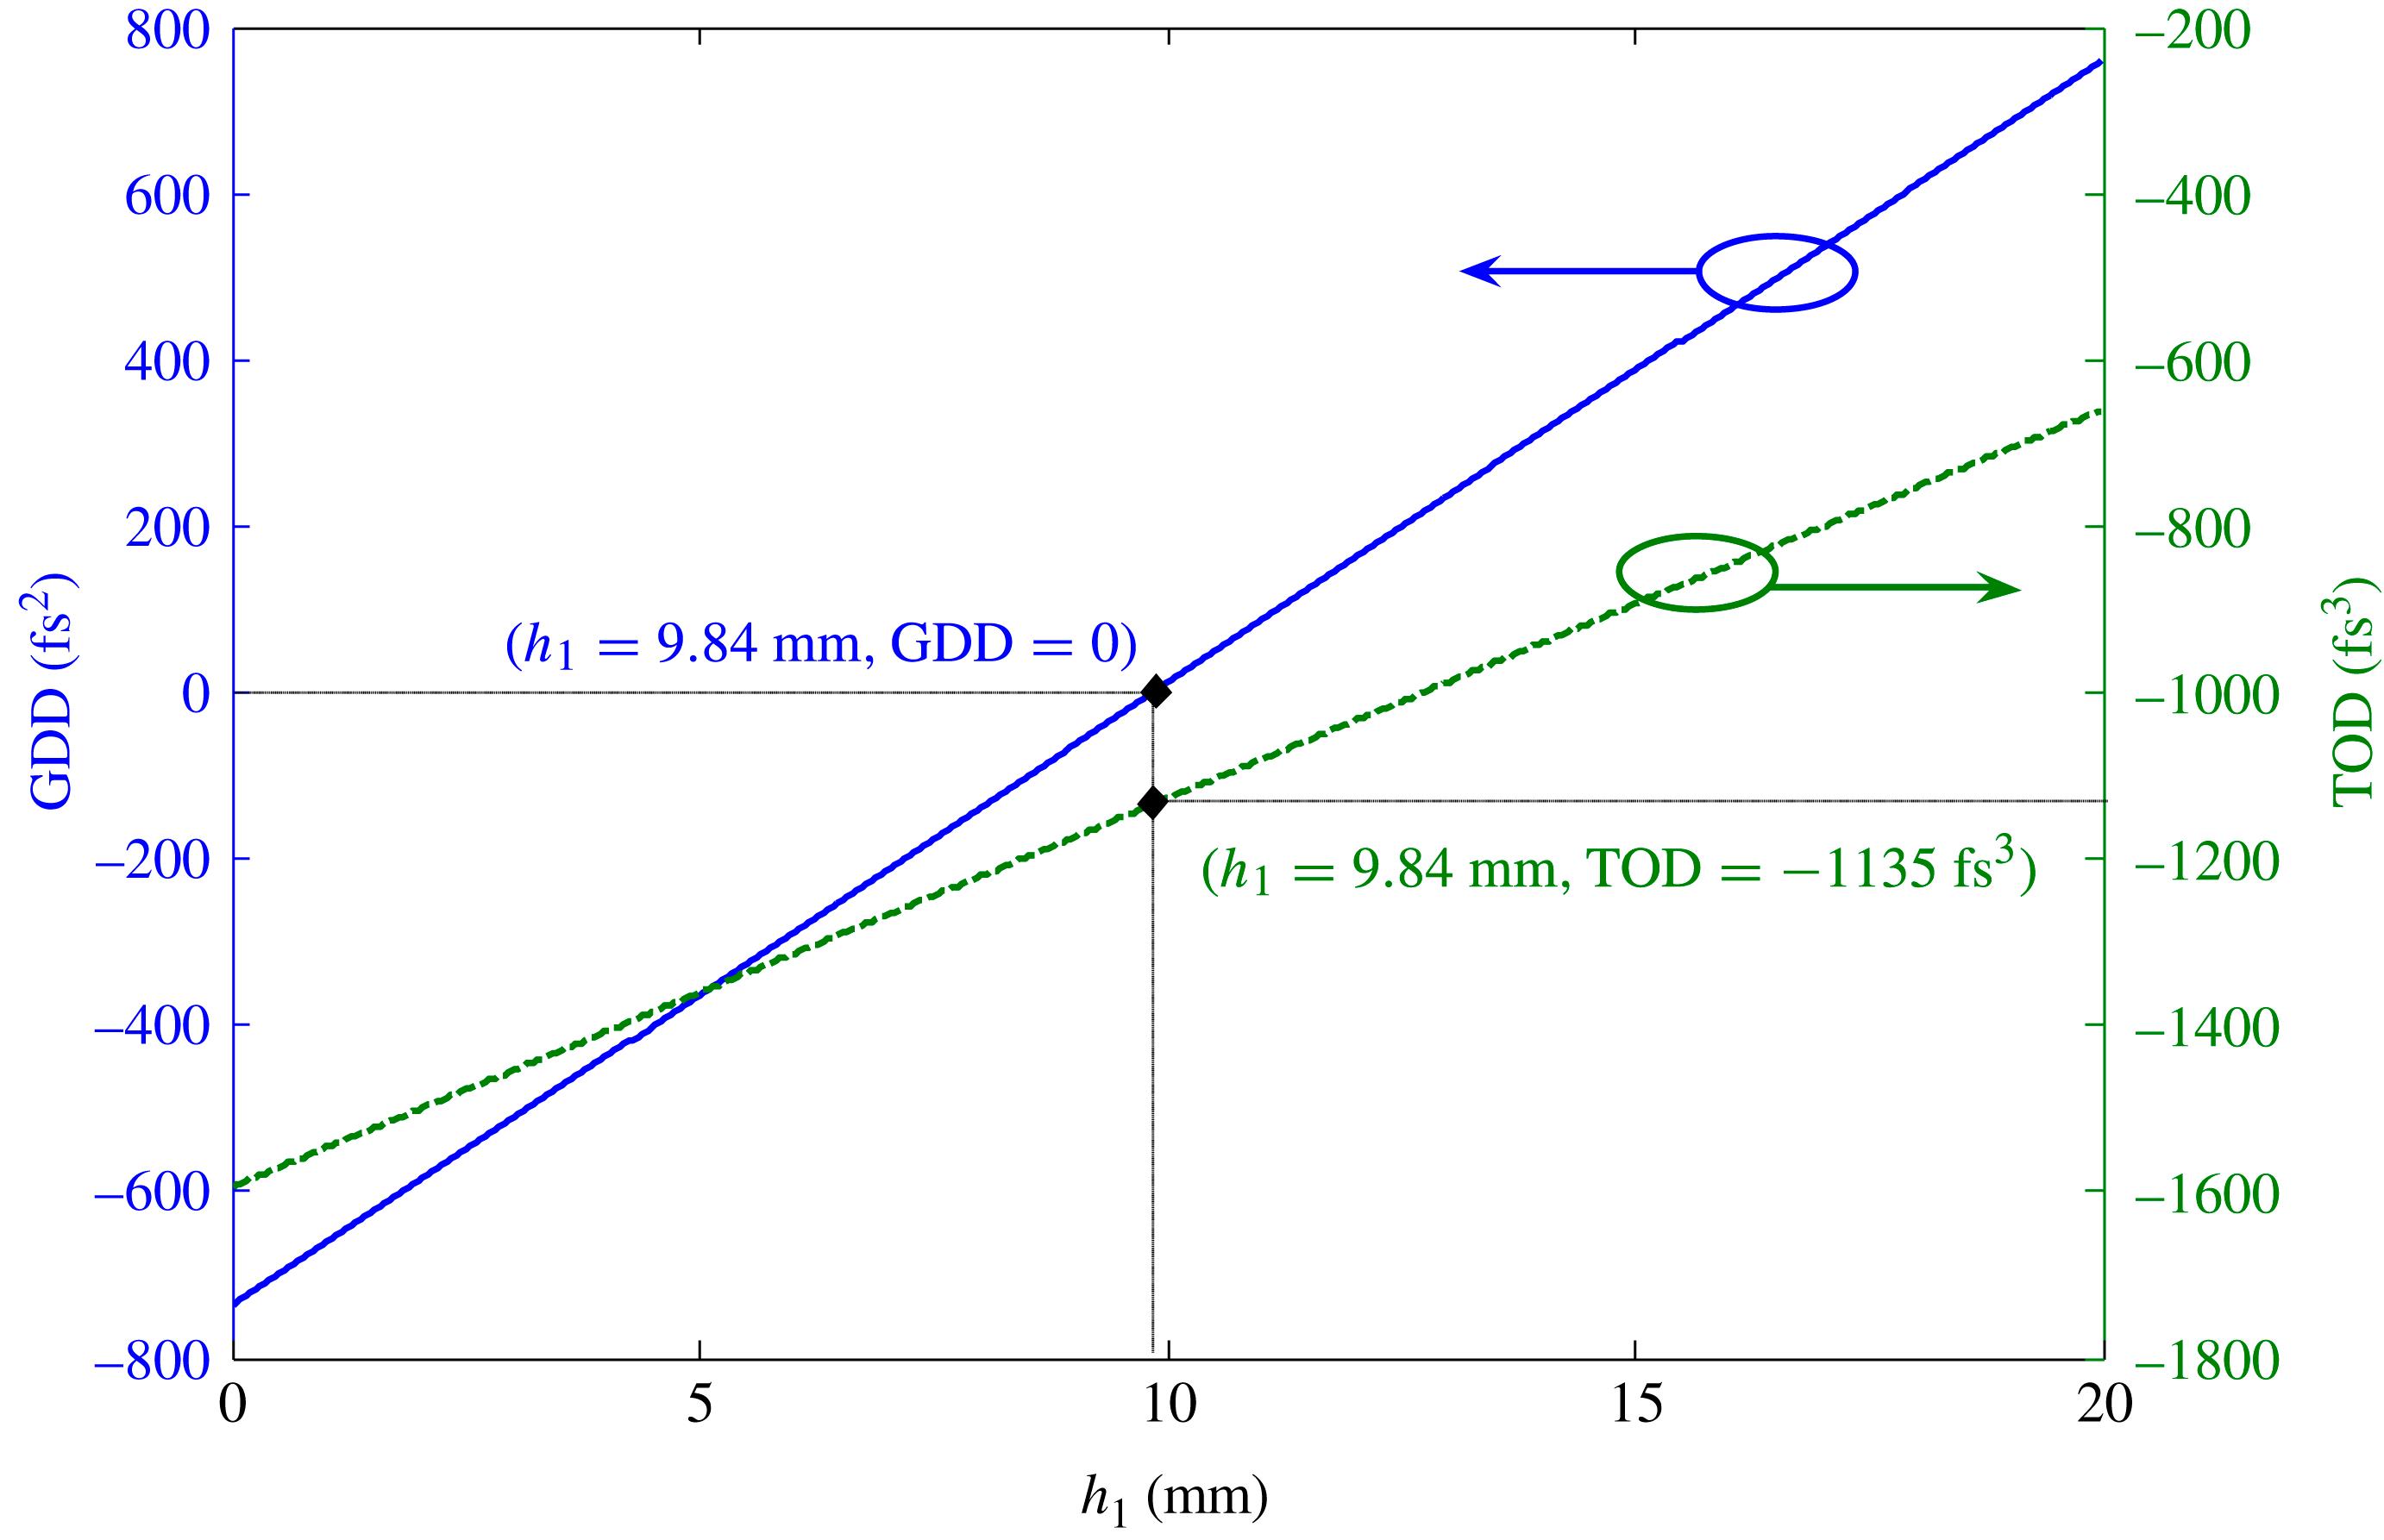 At the central wavelength, GDD and TOD change with . Material: ; simulation parameters: , , , , , and .